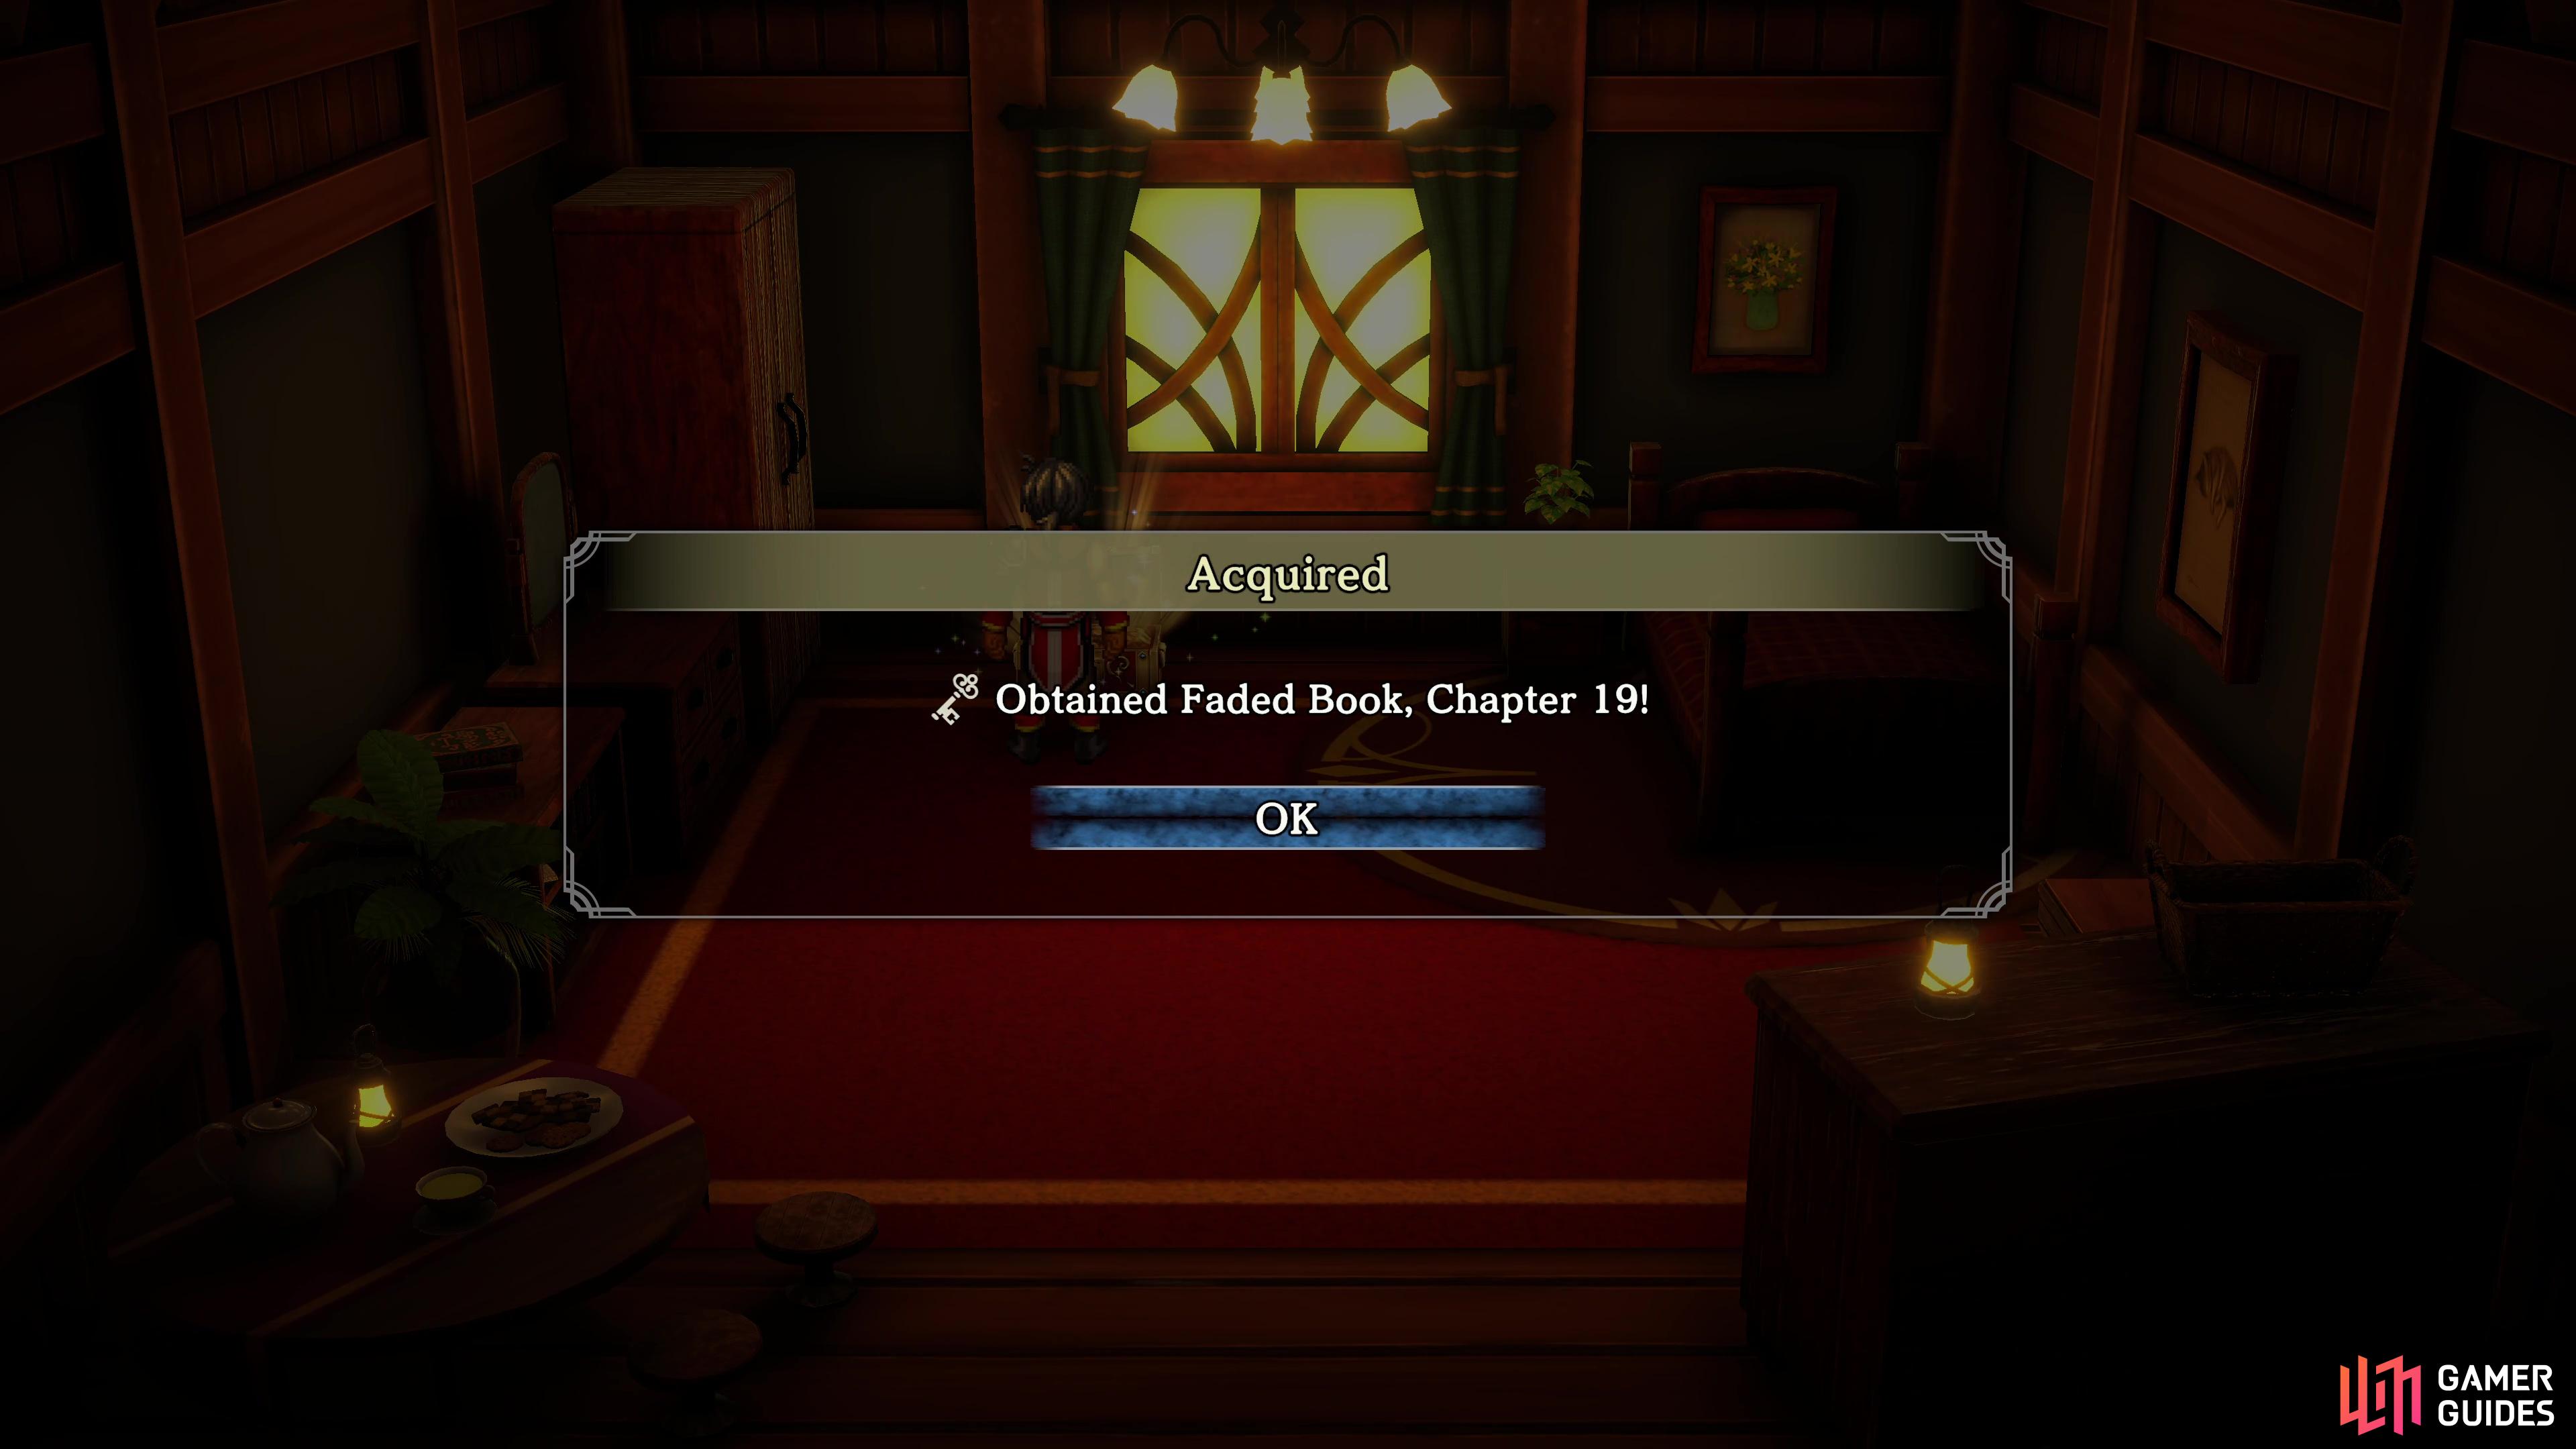 There are 20 Faded Book Chapters to seek out in Eiyuden Chronicle: Hundred Heroes.